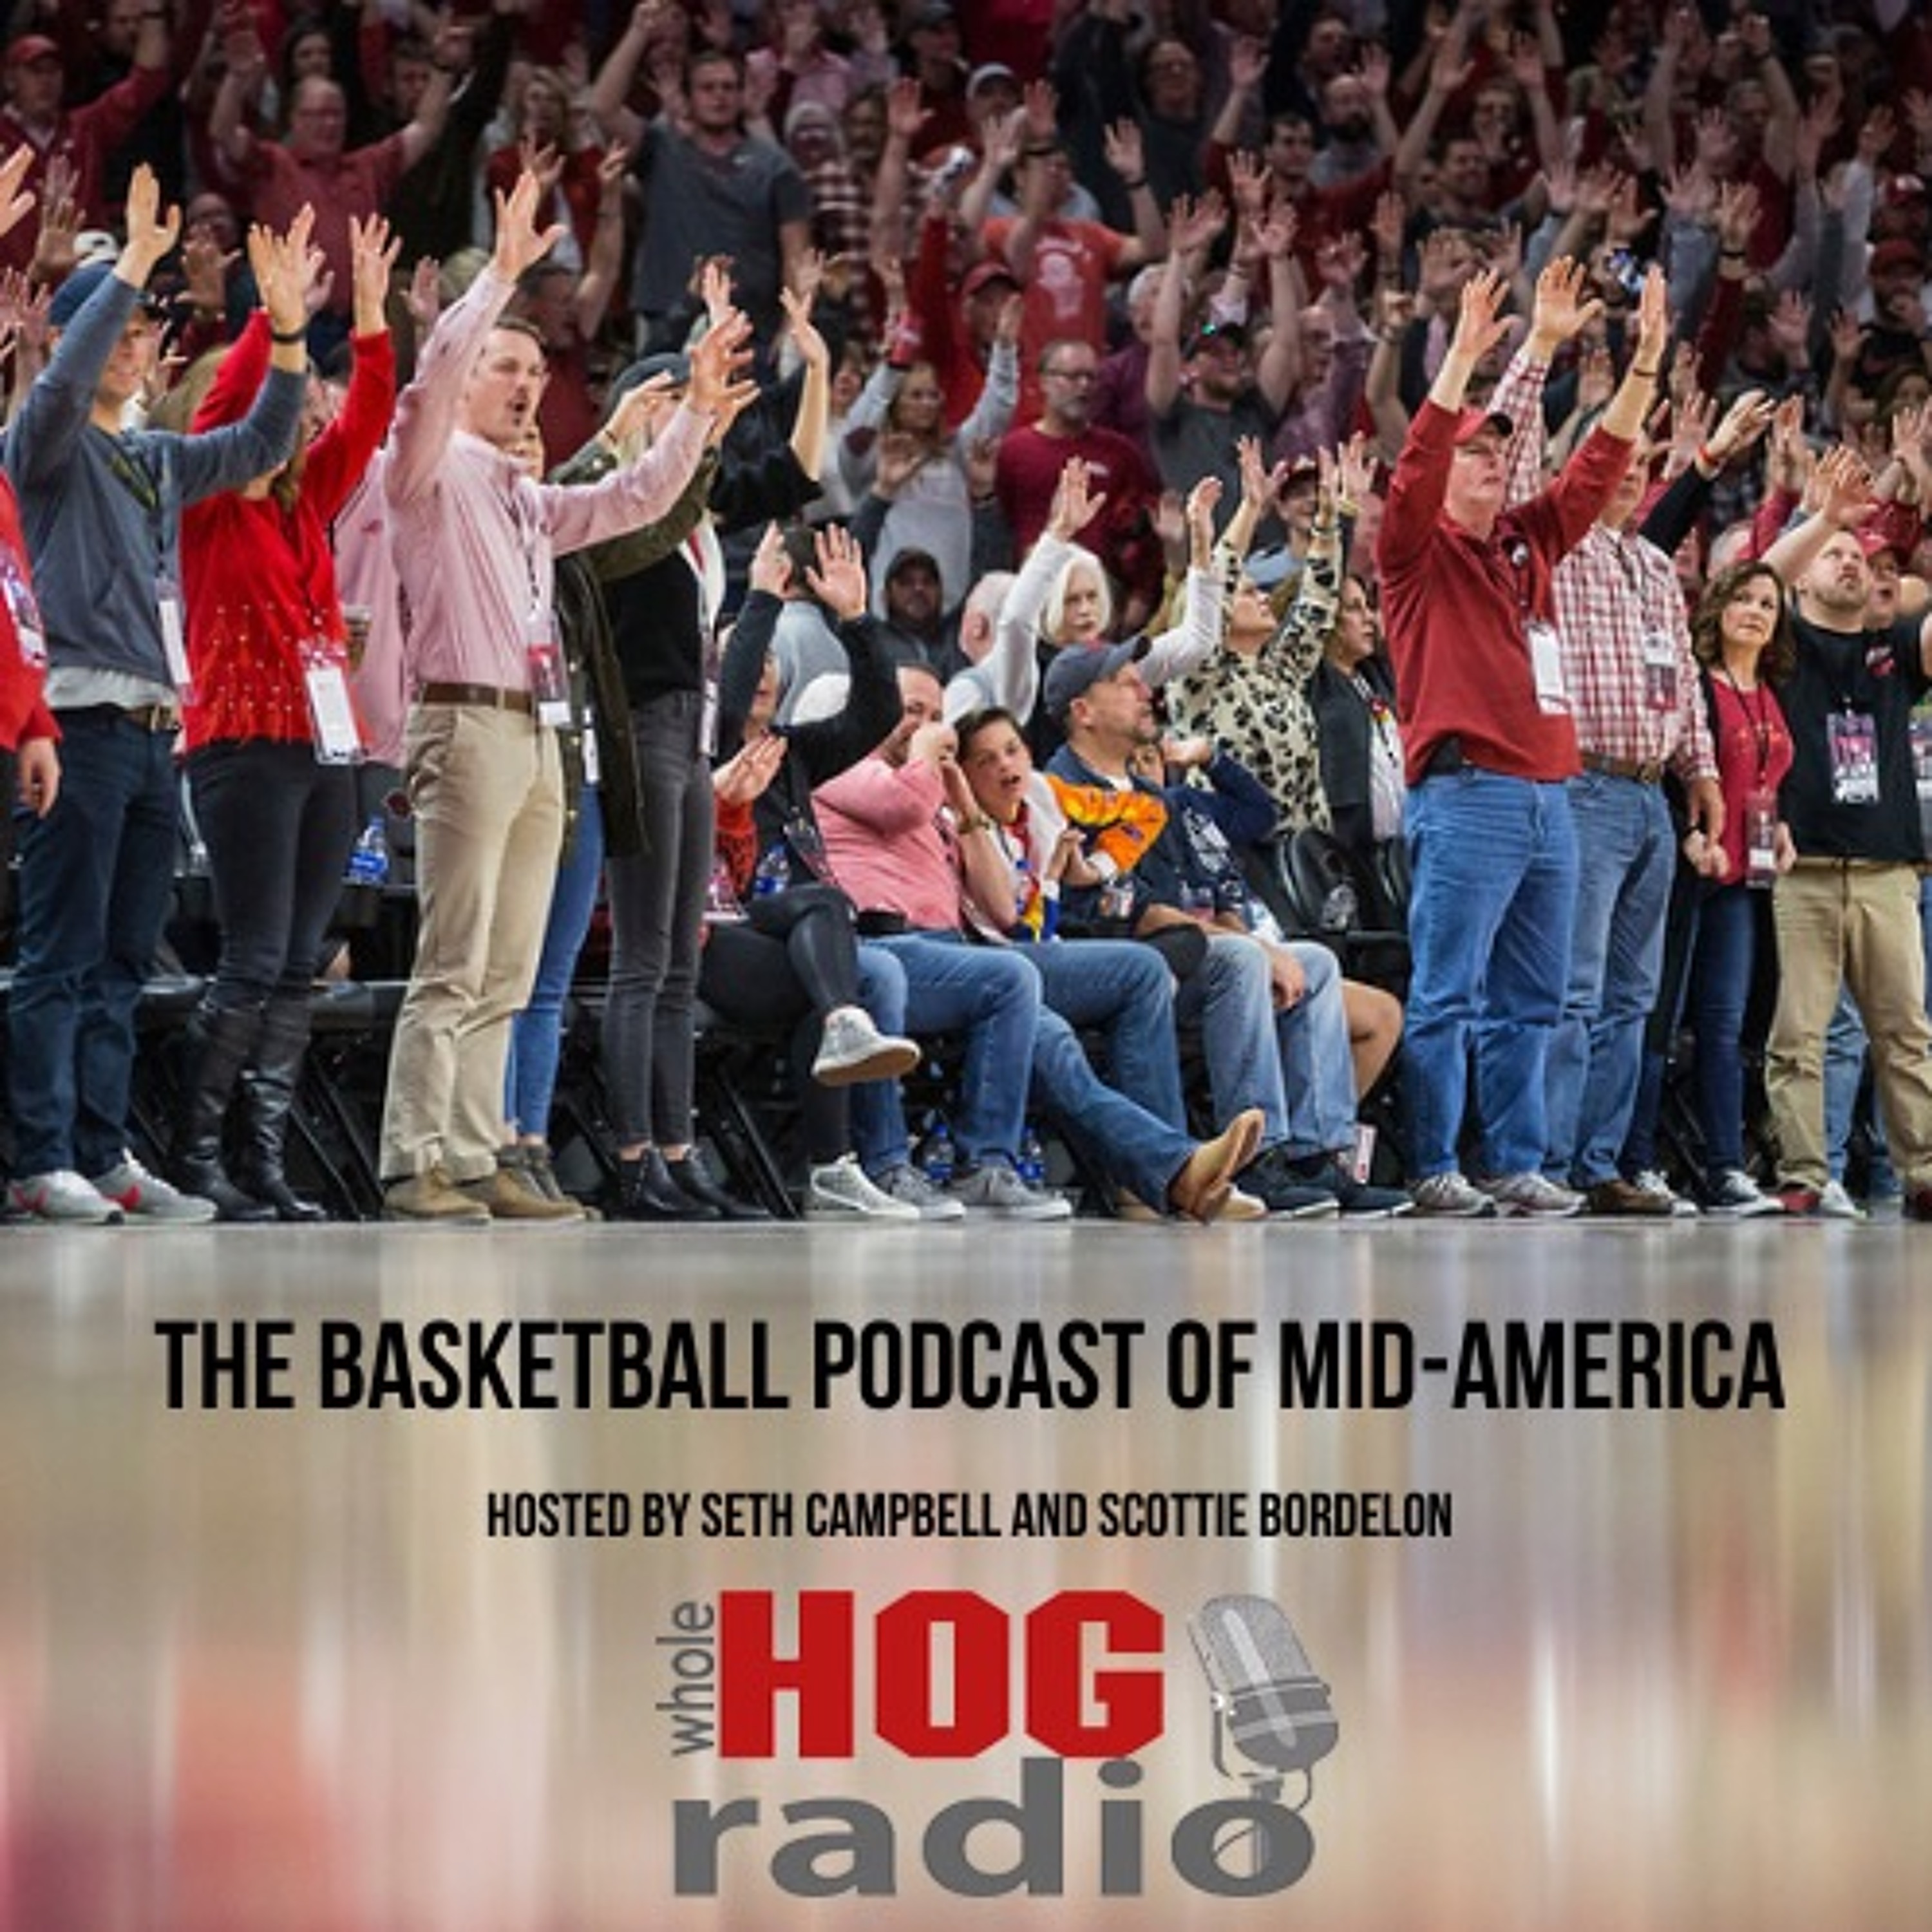 The Basketball Podcast of Mid-America: Adrio Bailey interview